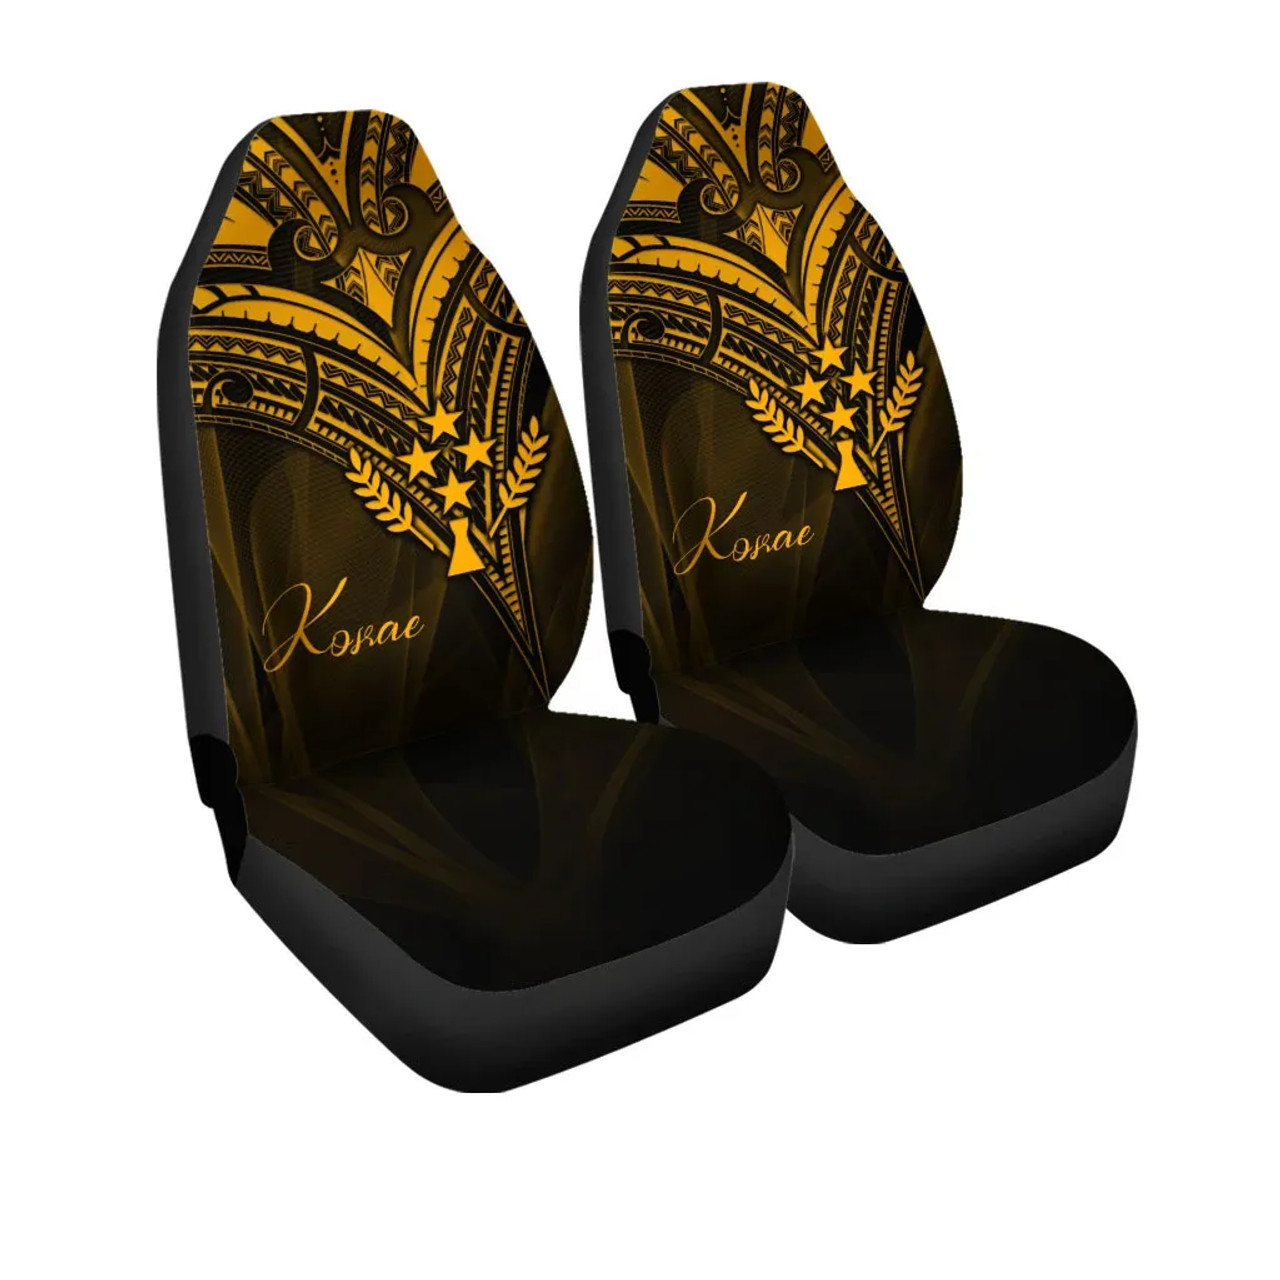 Kosrae State Car Seat Cover - Gold Color Cross Style